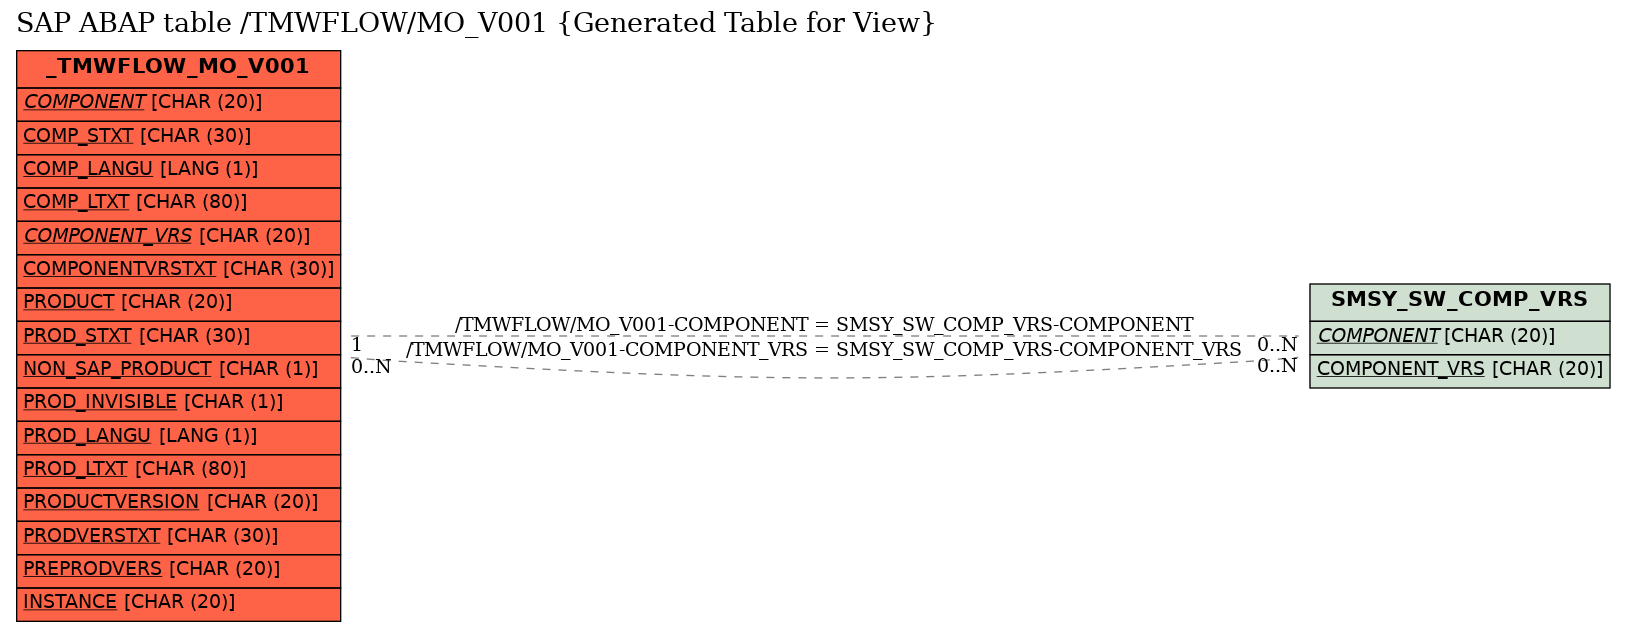 E-R Diagram for table /TMWFLOW/MO_V001 (Generated Table for View)